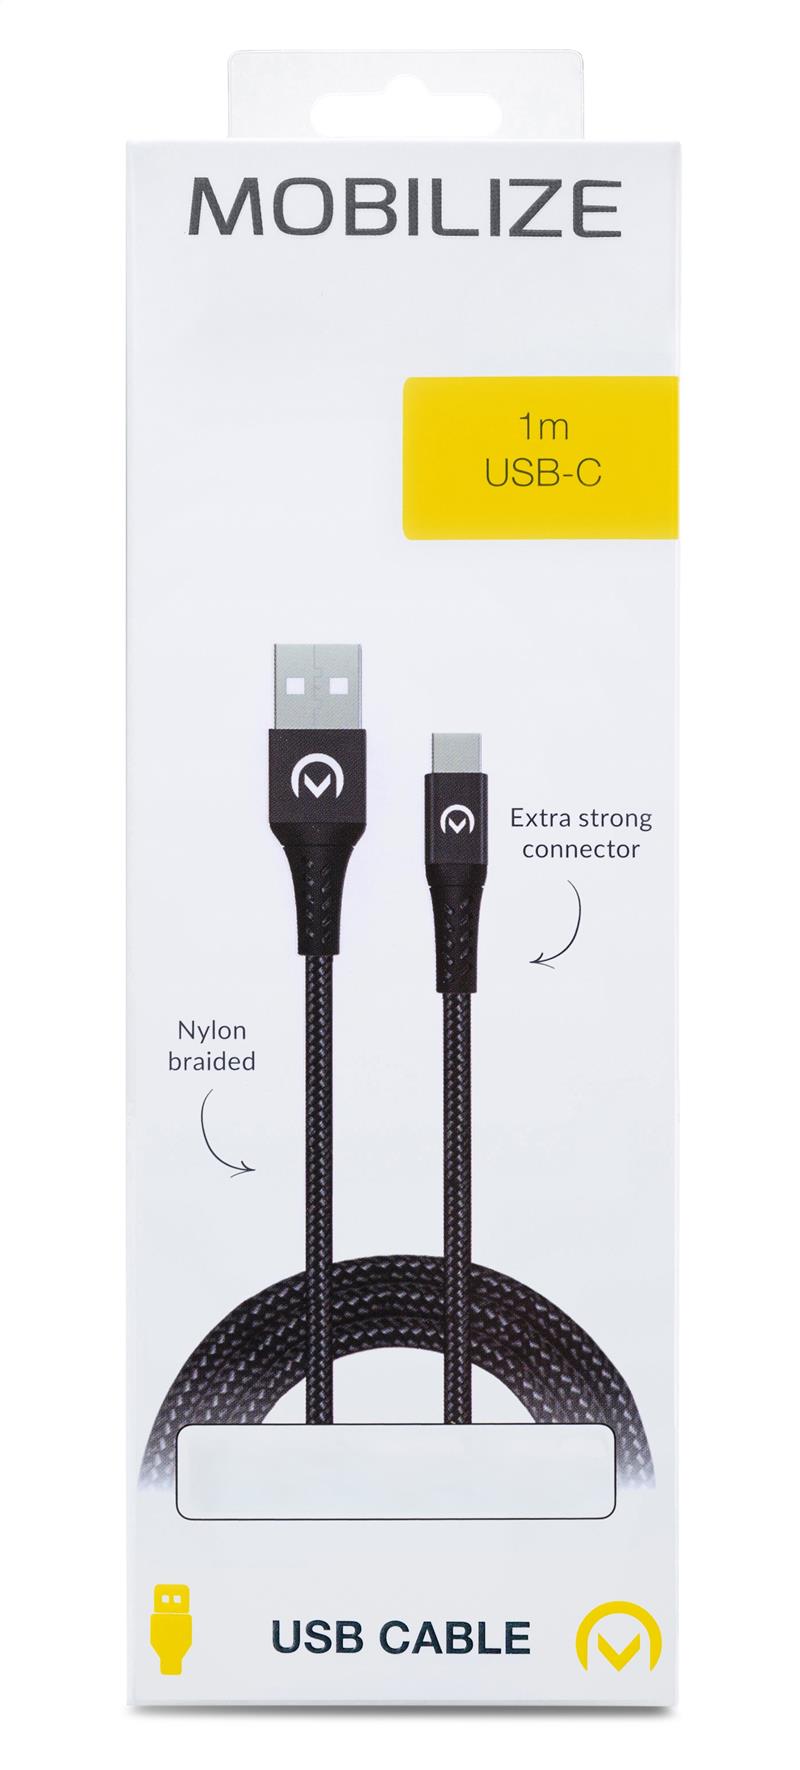 Mobilize Strong Nylon Cable USB to USB-C 1m 15W Black